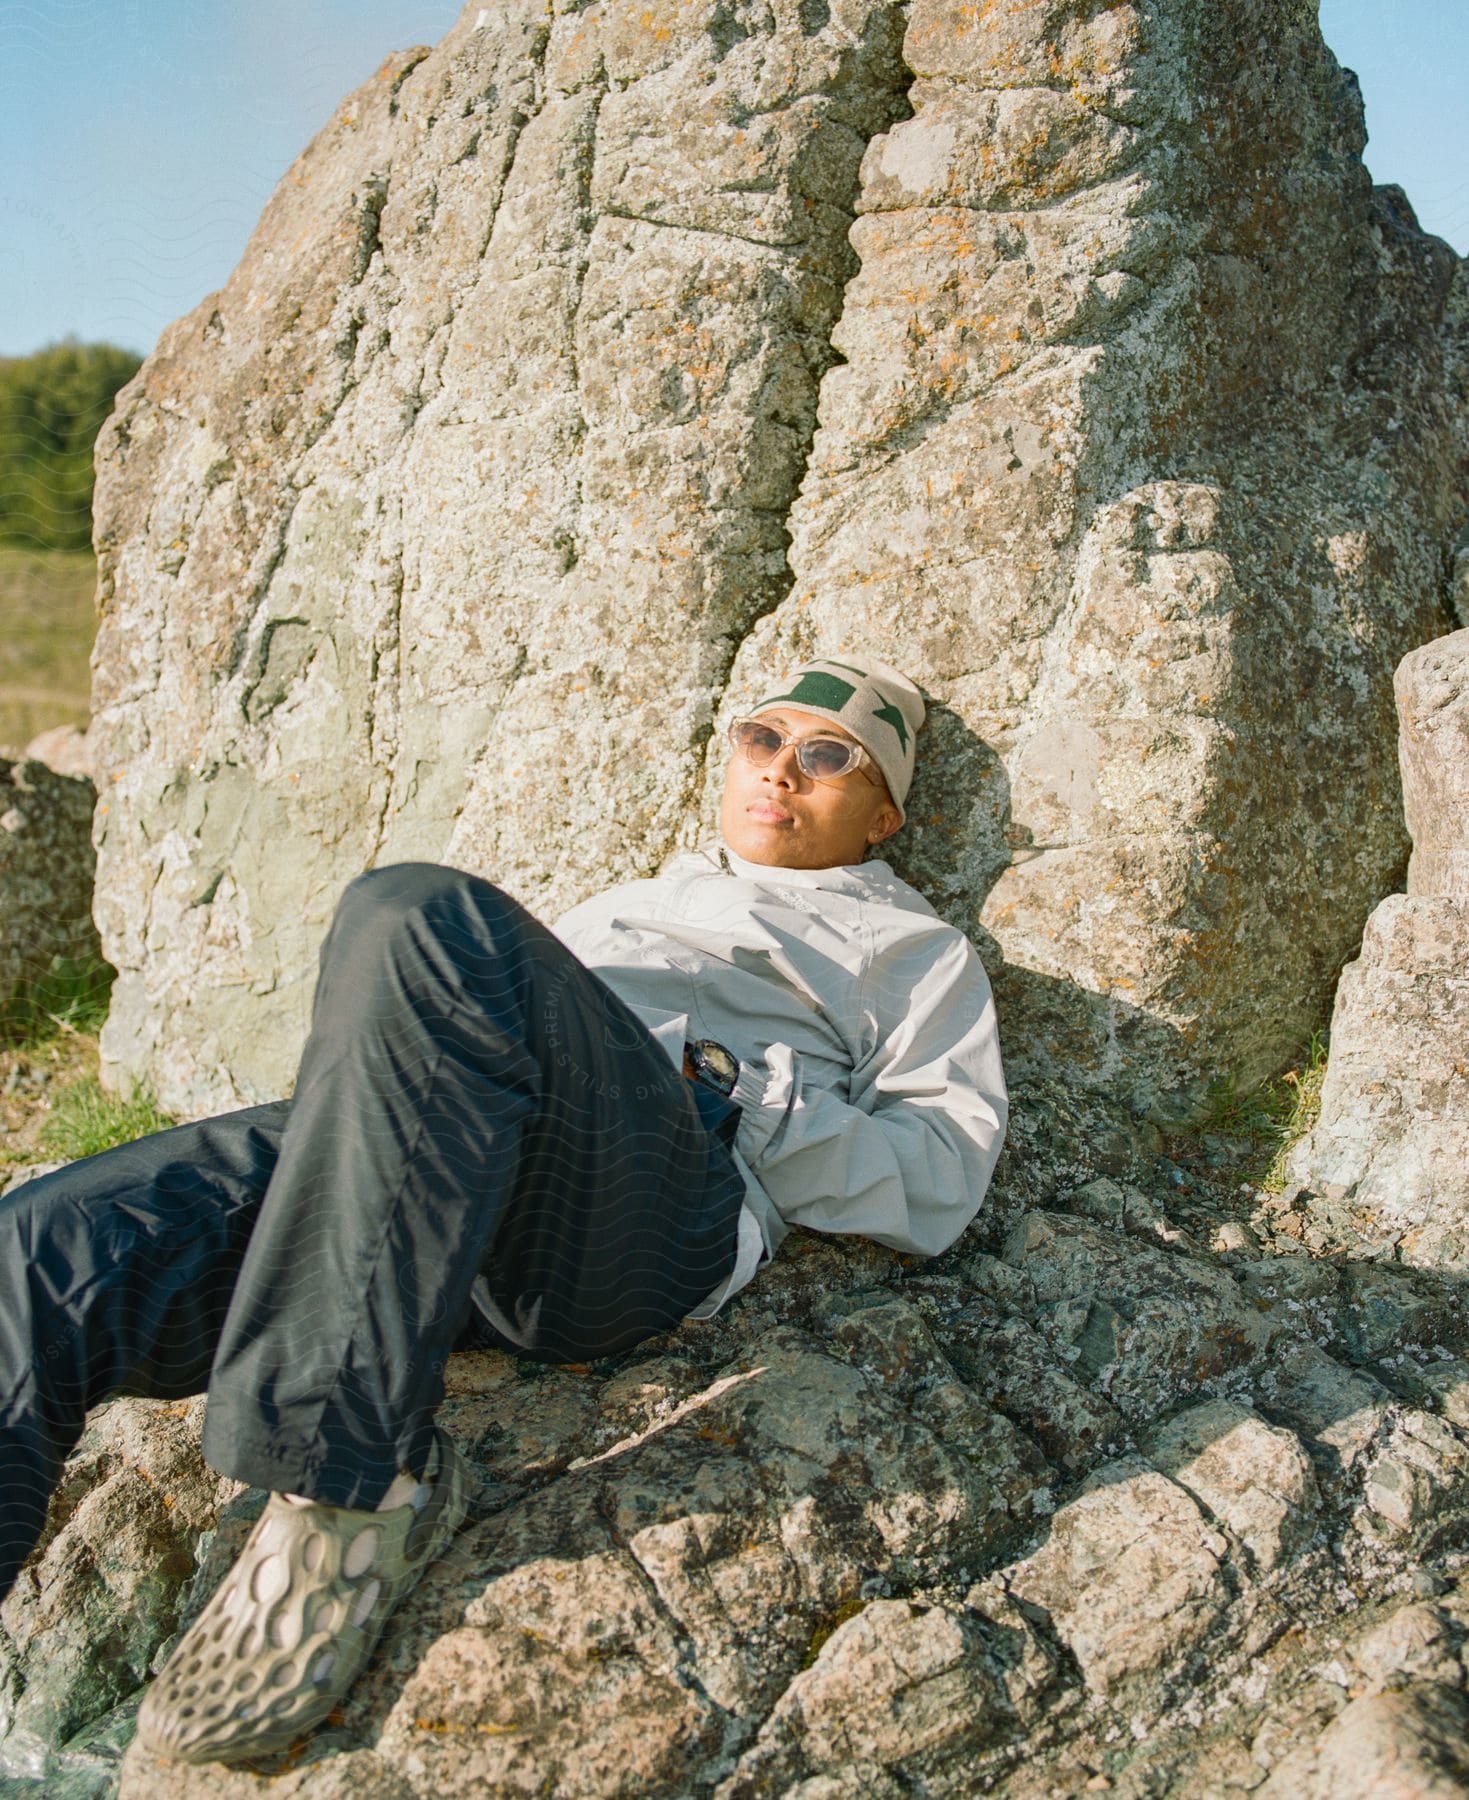 A happy person wearing sunglasses sitting on a rock in nature